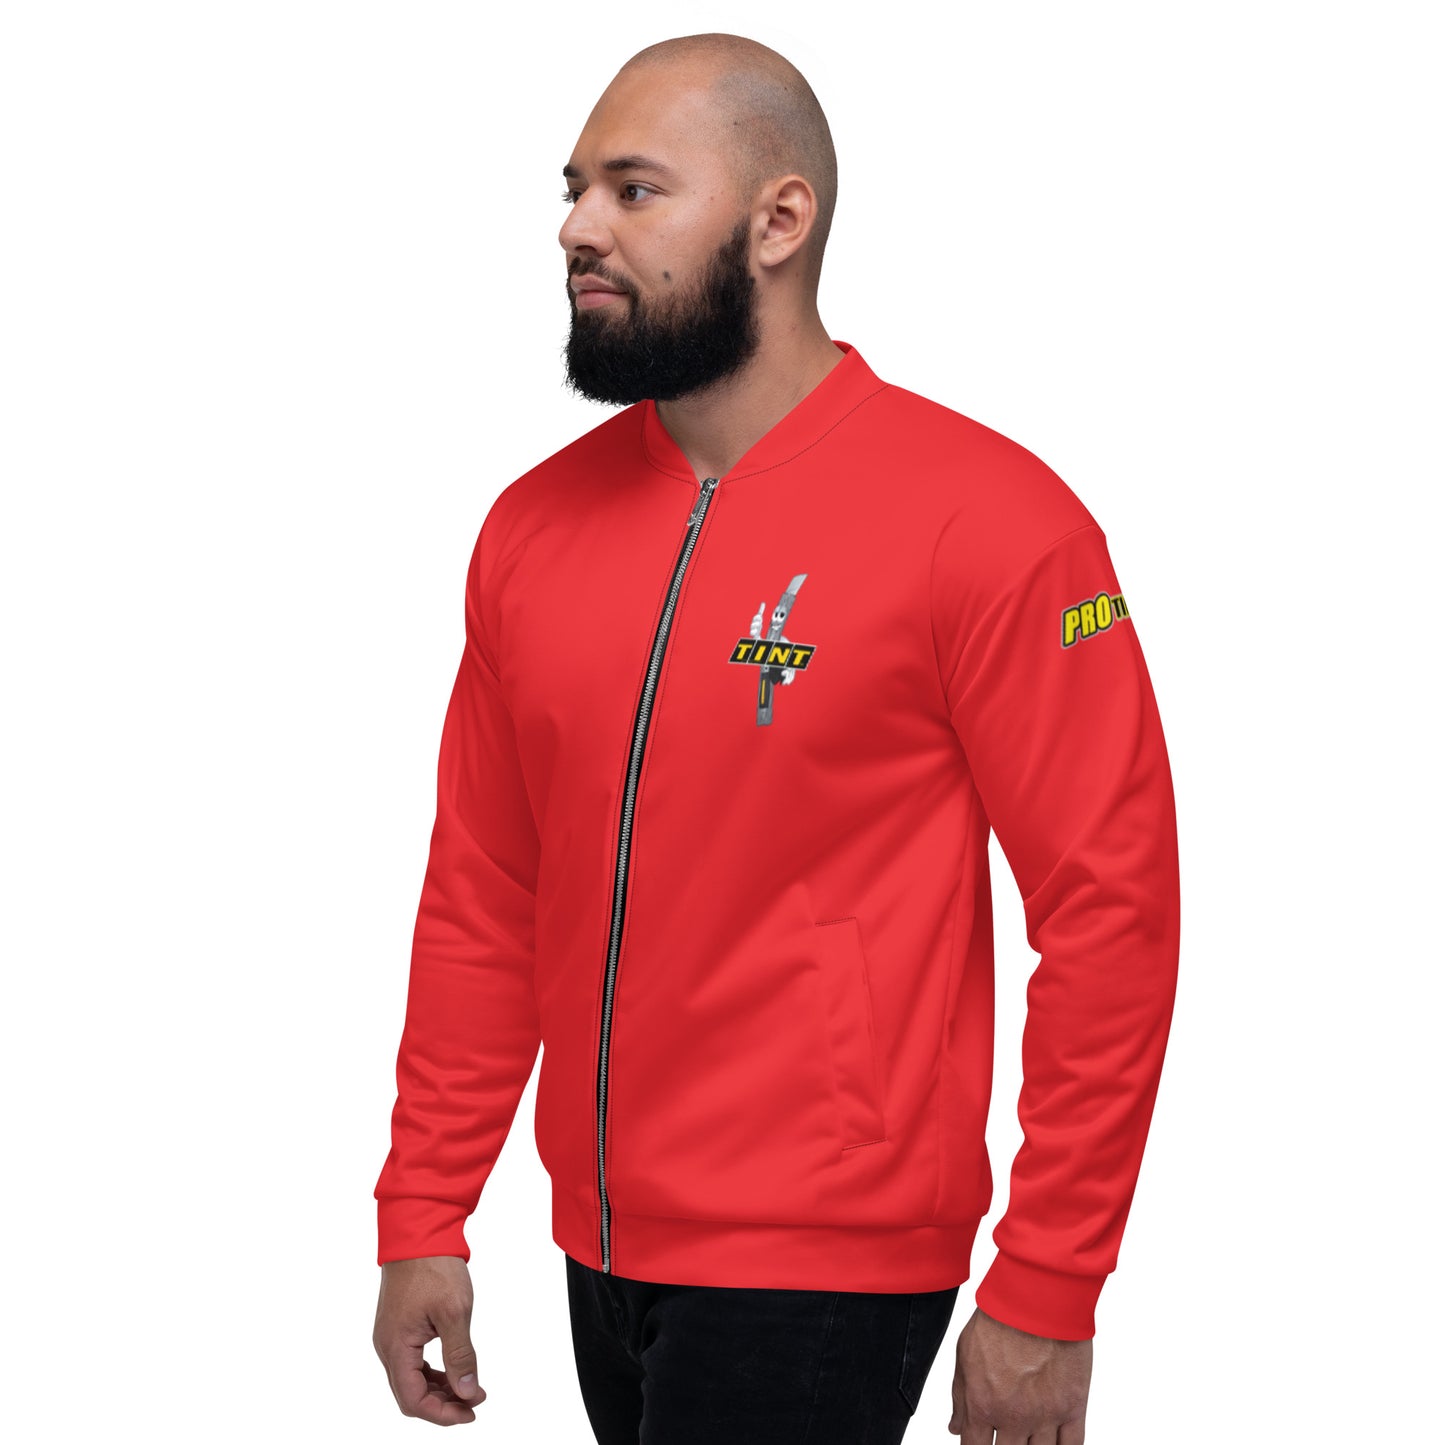 TINT with OLFA by Pro Tinter (RED) Unisex Bomber Jacket